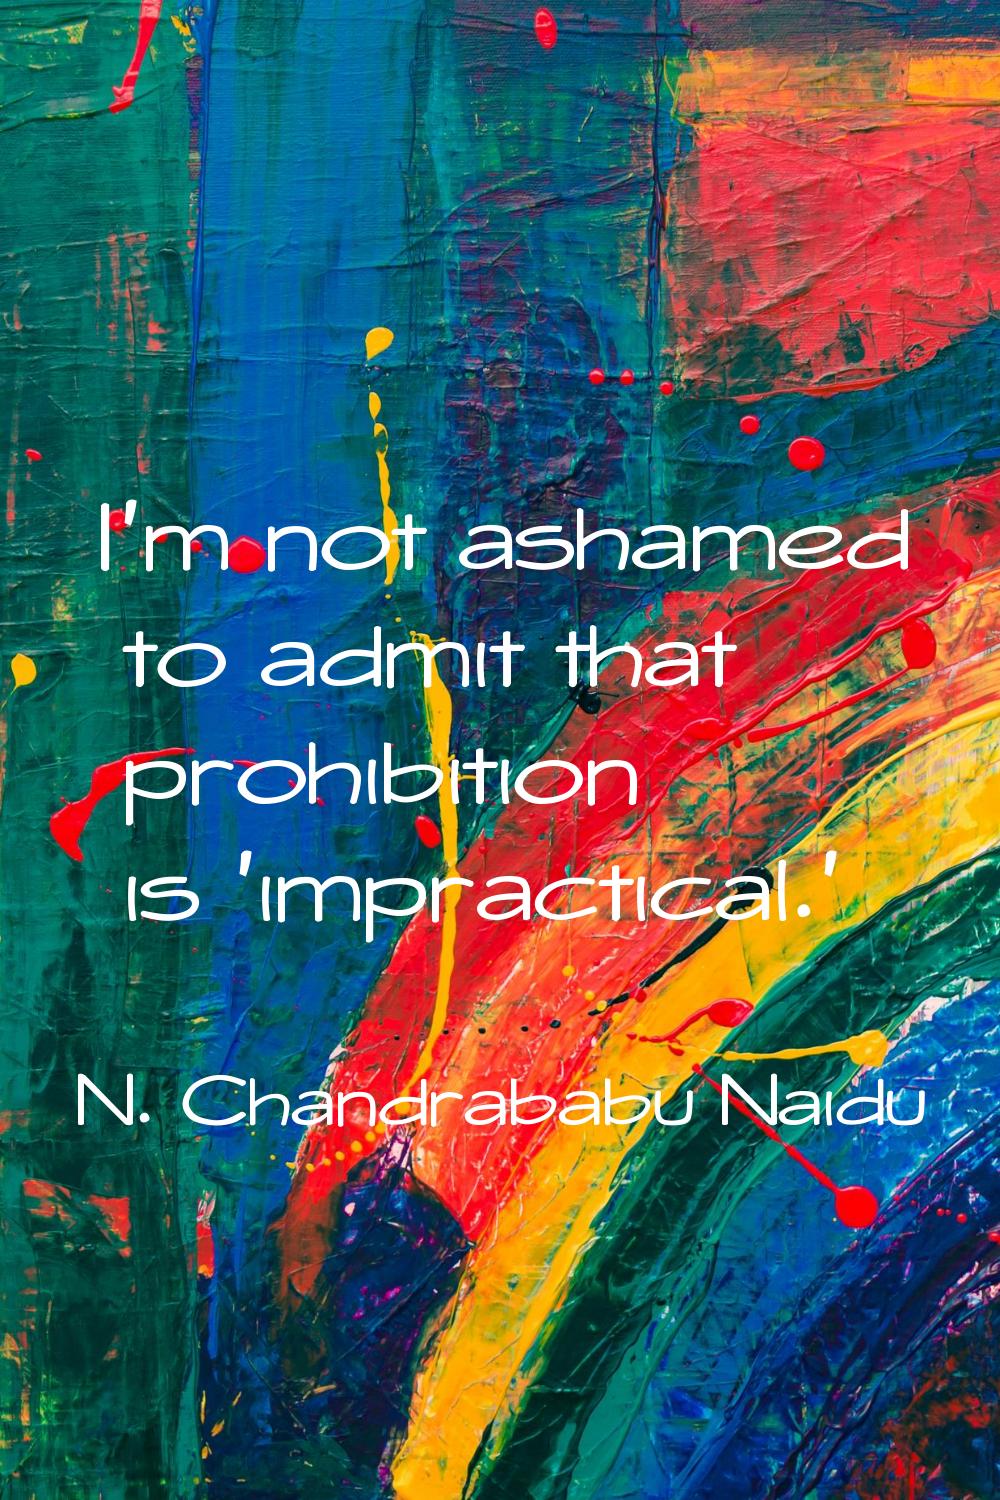 I'm not ashamed to admit that prohibition is 'impractical.'